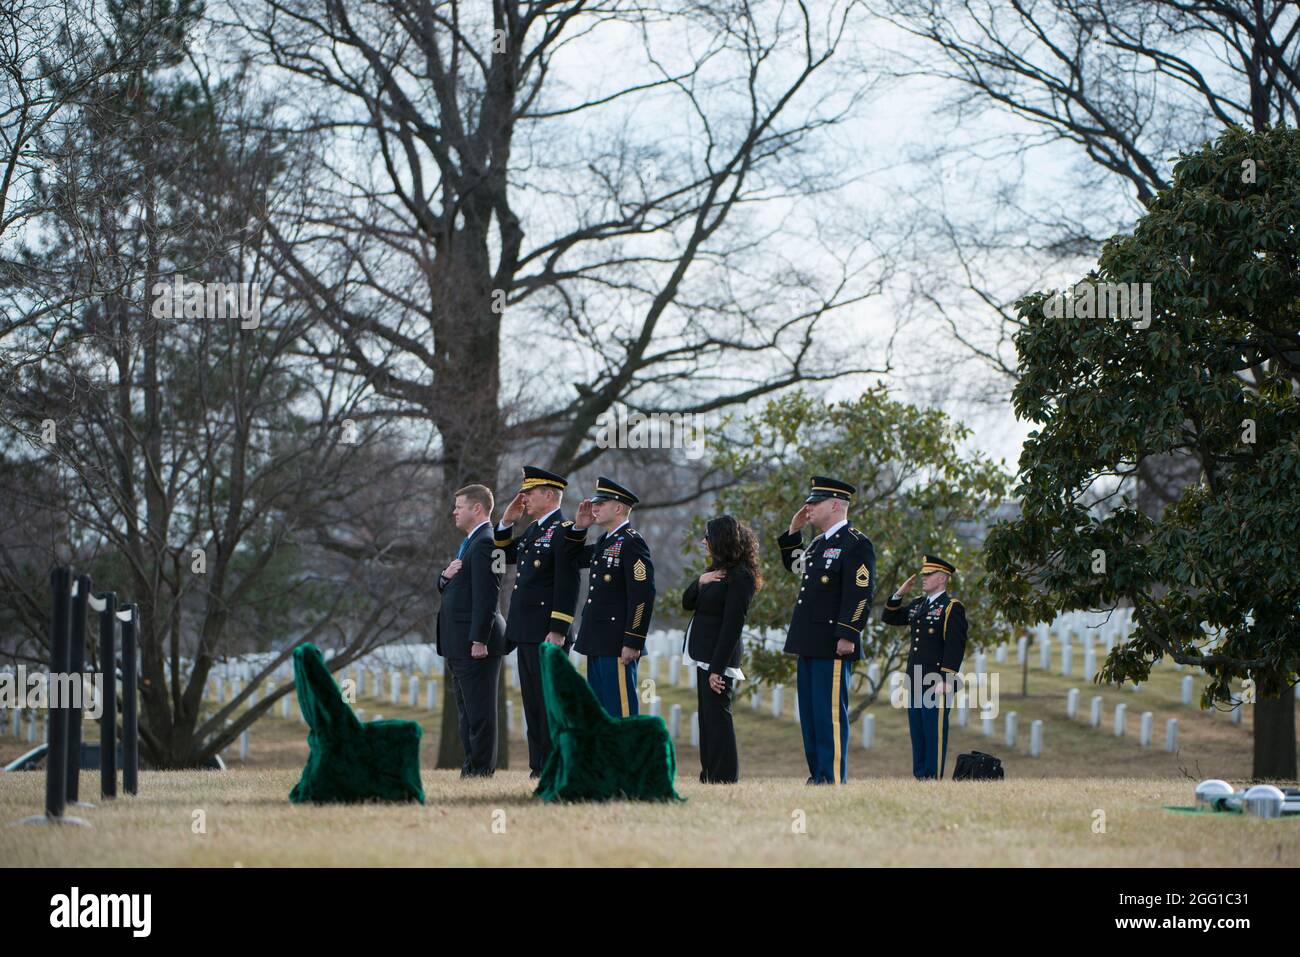 (From the left) Under Secretary of the Army Ryan McCarthy; Vice Chief of Staff of the Army Gen. James McConville; Sgt. Maj. of the Army Daniel Dailey; Executive Director of Army National Military Cemeteries Karen Durham-Aguilera; and Arlington National Cemetery Senior Enlisted Advisor Master Sgt. Todd Parsons; render honors during the full honors gravesite service for U.S. Army Sgt. 1st Class Mihail Golin, in Section 60 of Arlington National Cemetery,  Arlington, Virginia, Jan. 22, 2018. Golin, an 18B Special Forces Weapons Sergeant assigned to 10th Special Forces Group (Airborne) died Jan. 1, Stock Photo